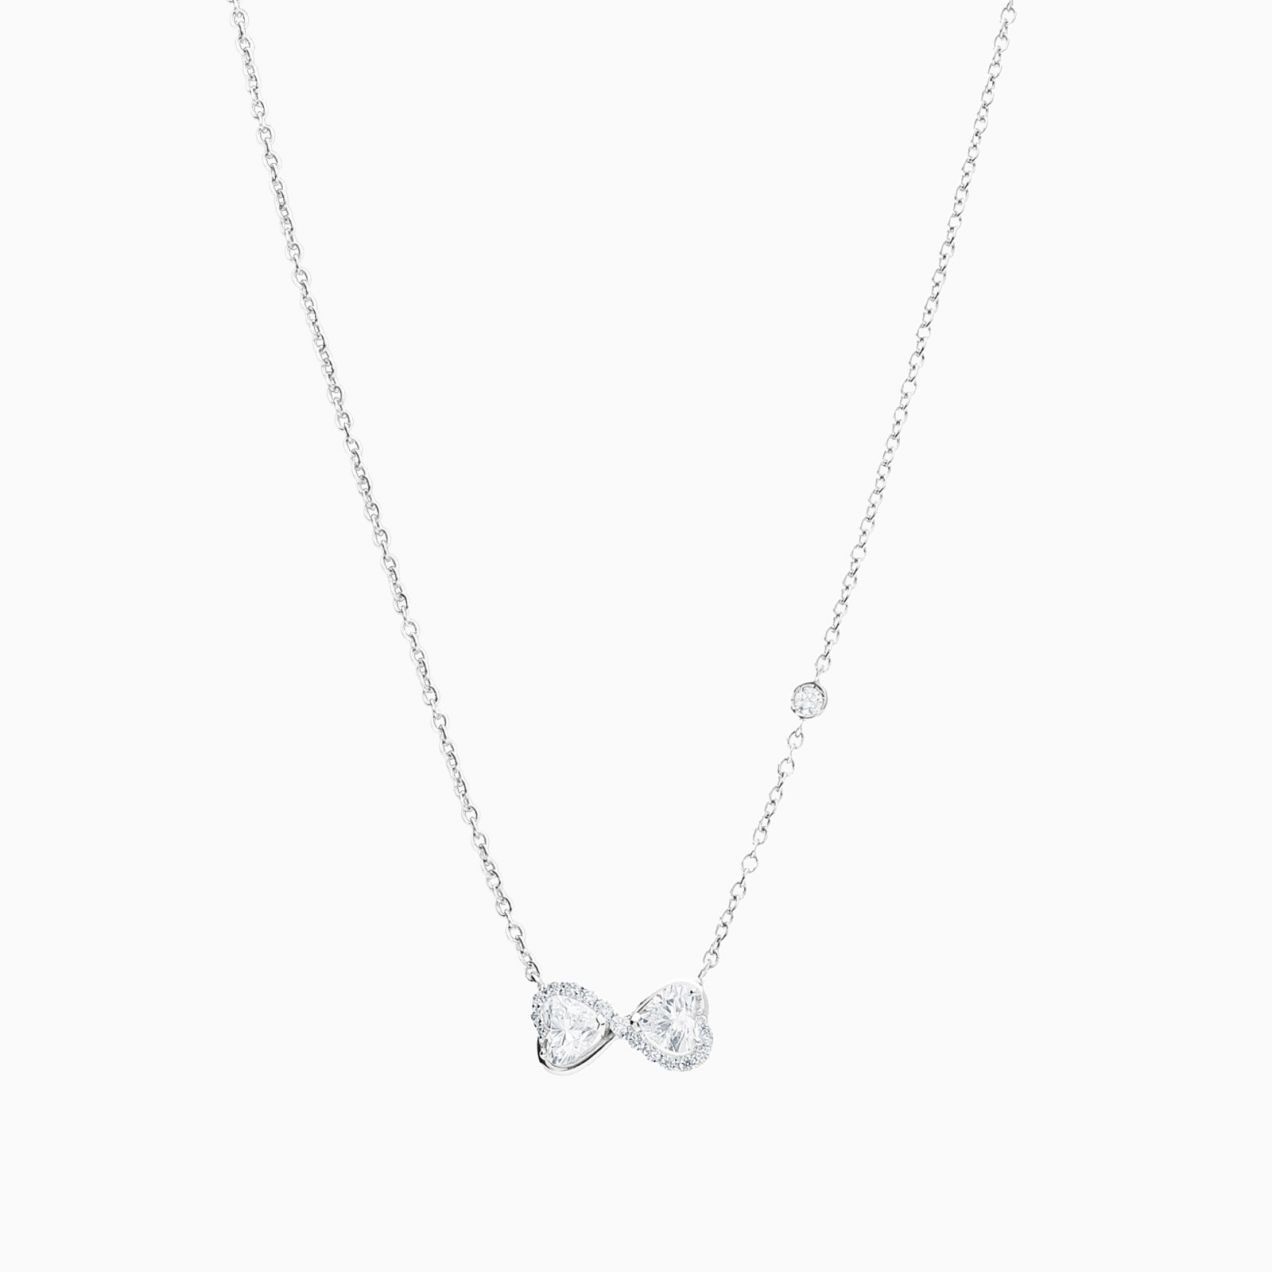 Infinity symbol pendant in white gold with heart-cut diamonds and diamonds